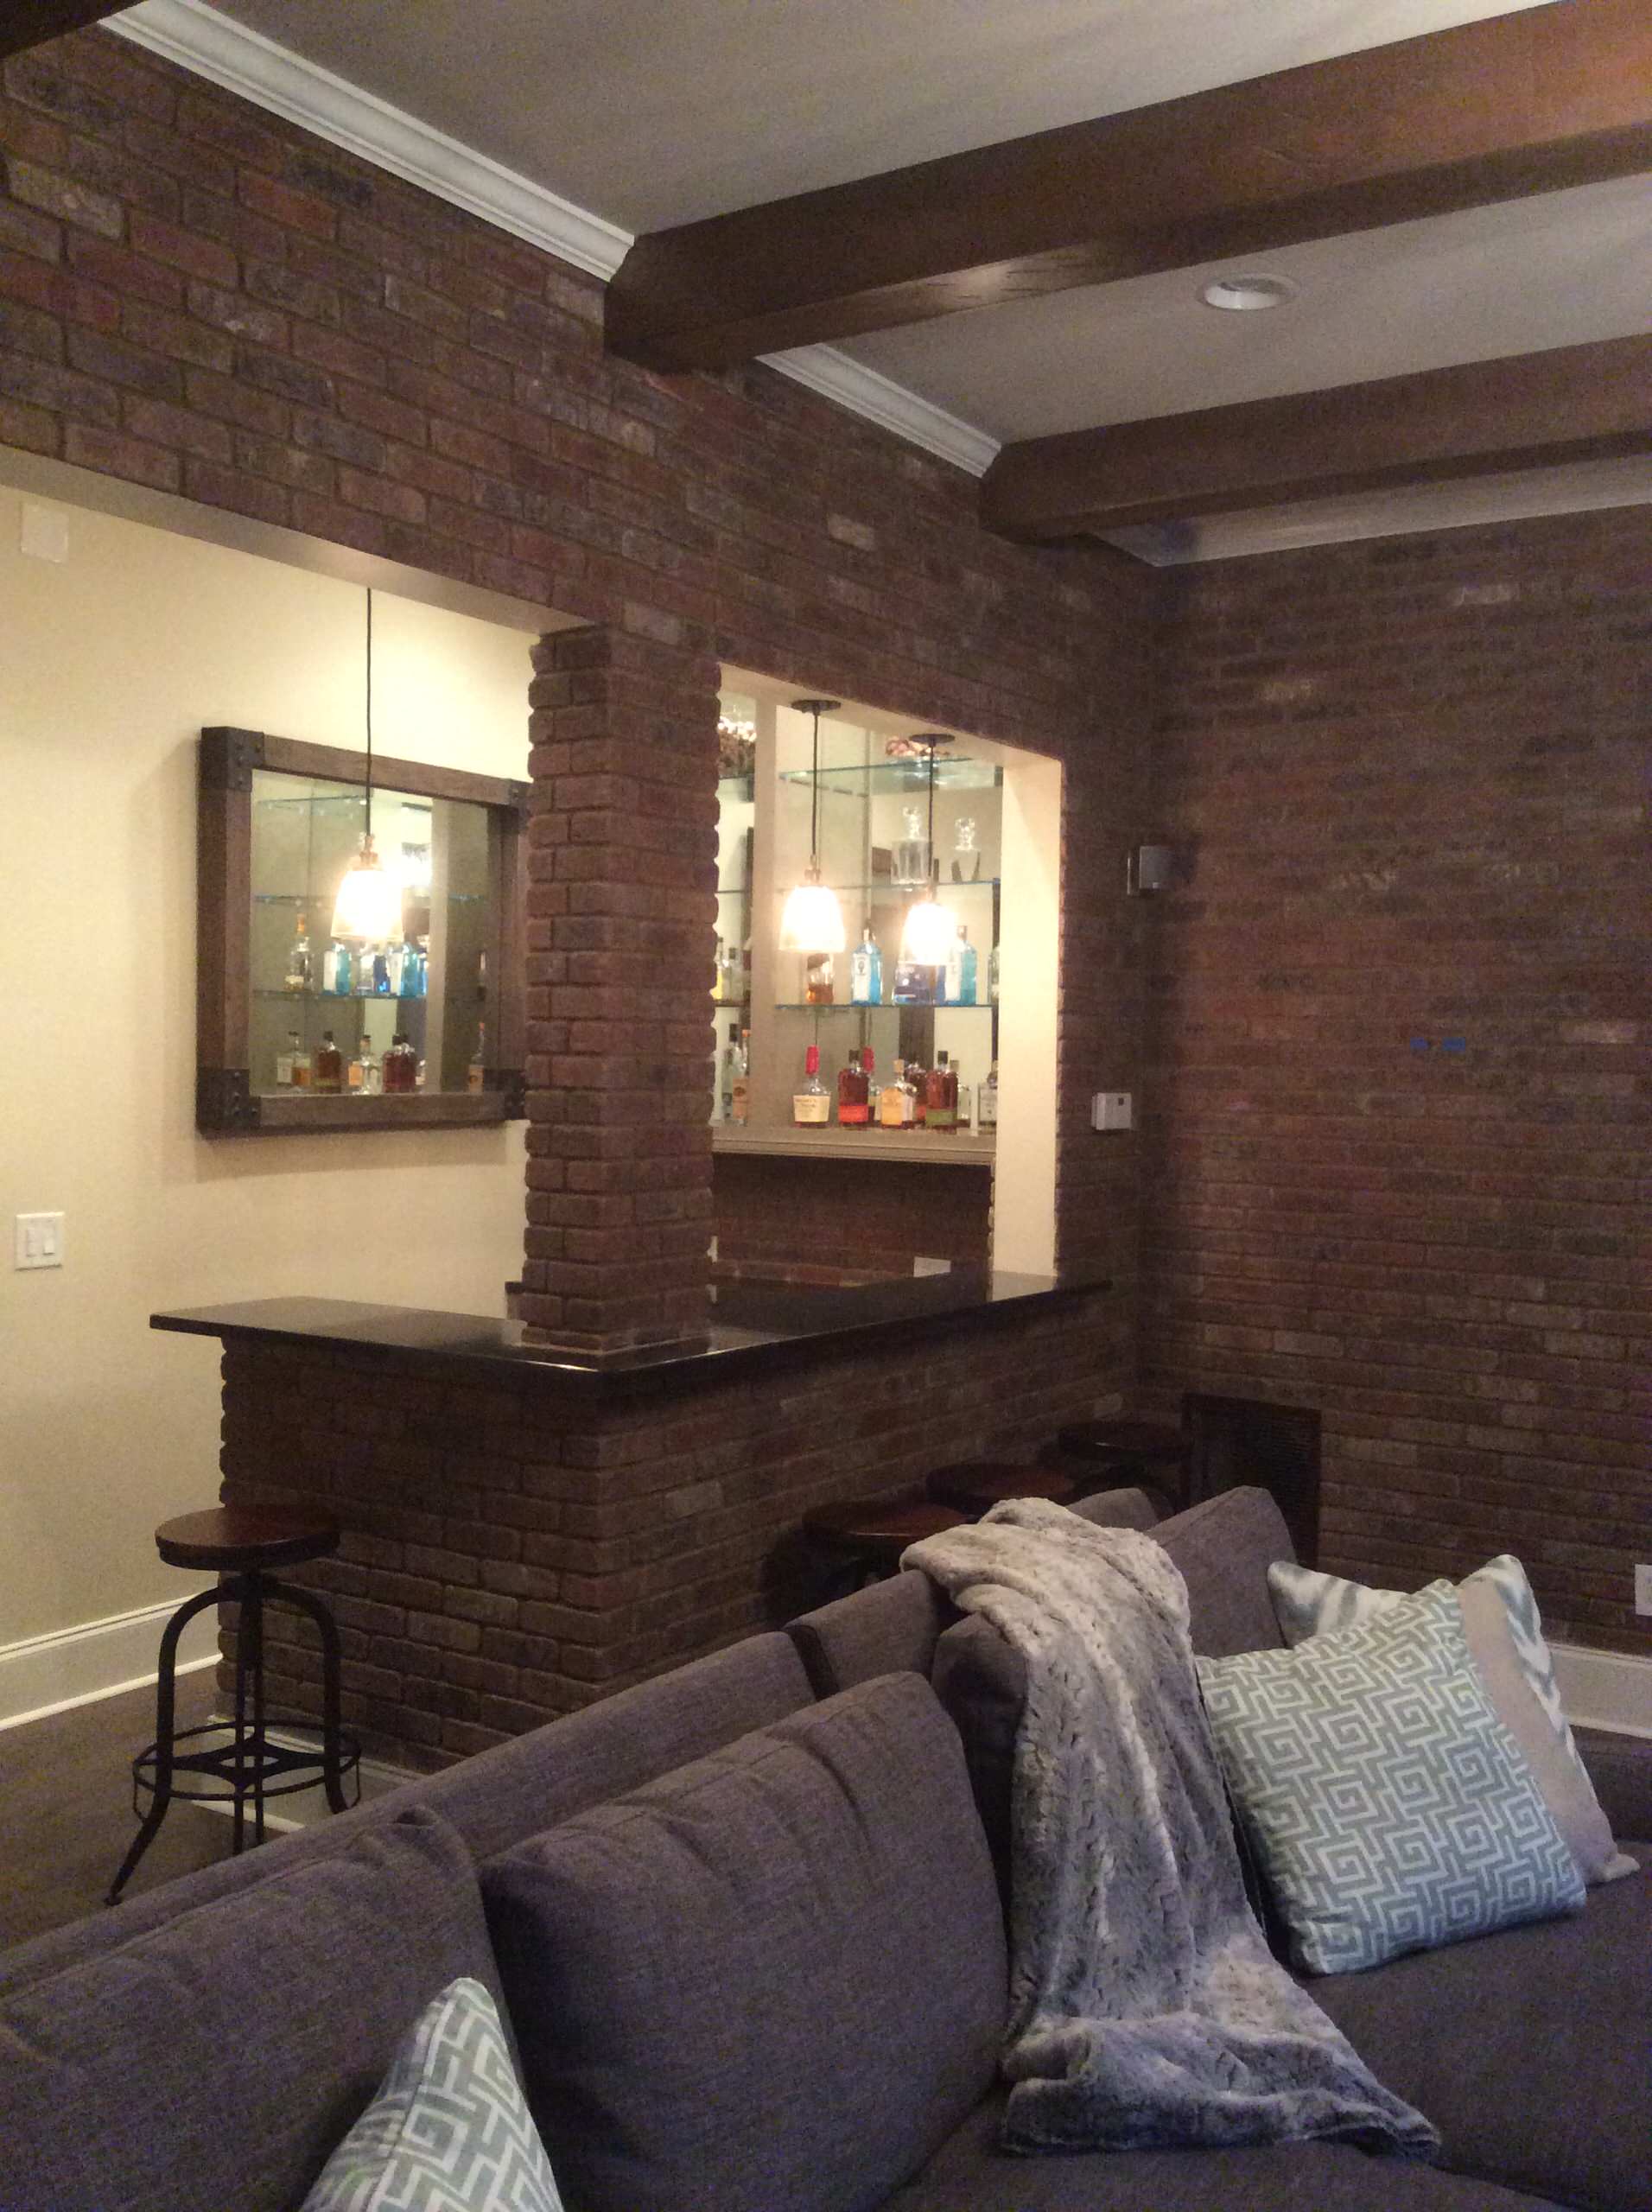 Industrial and Rustic Mix in Basement Makeover